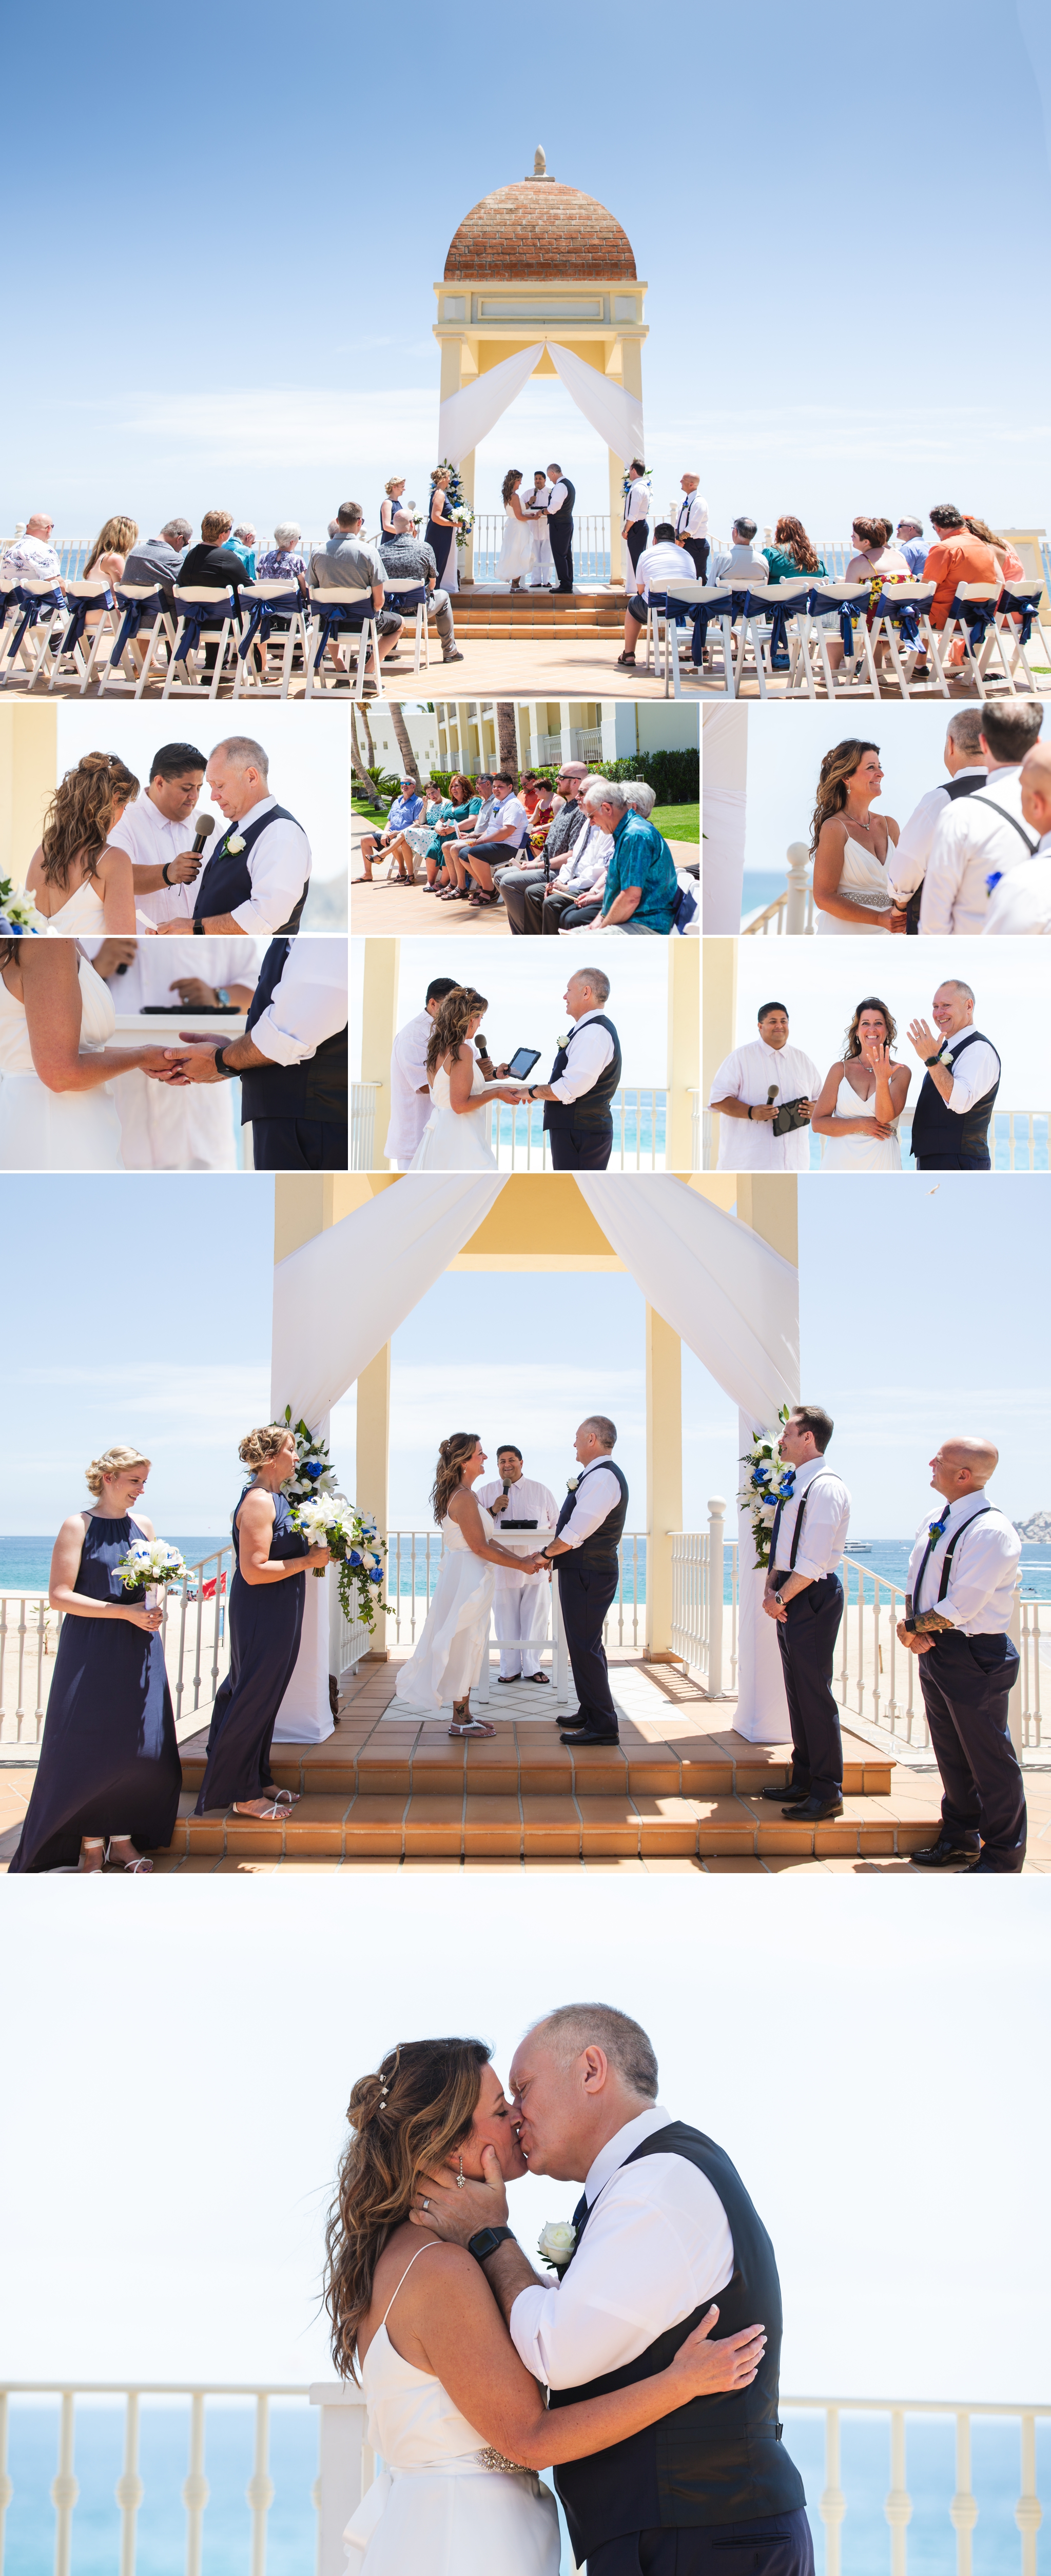 Wedding Ceremony photos at the Hotel Riu Palace in Cabo San Lucas